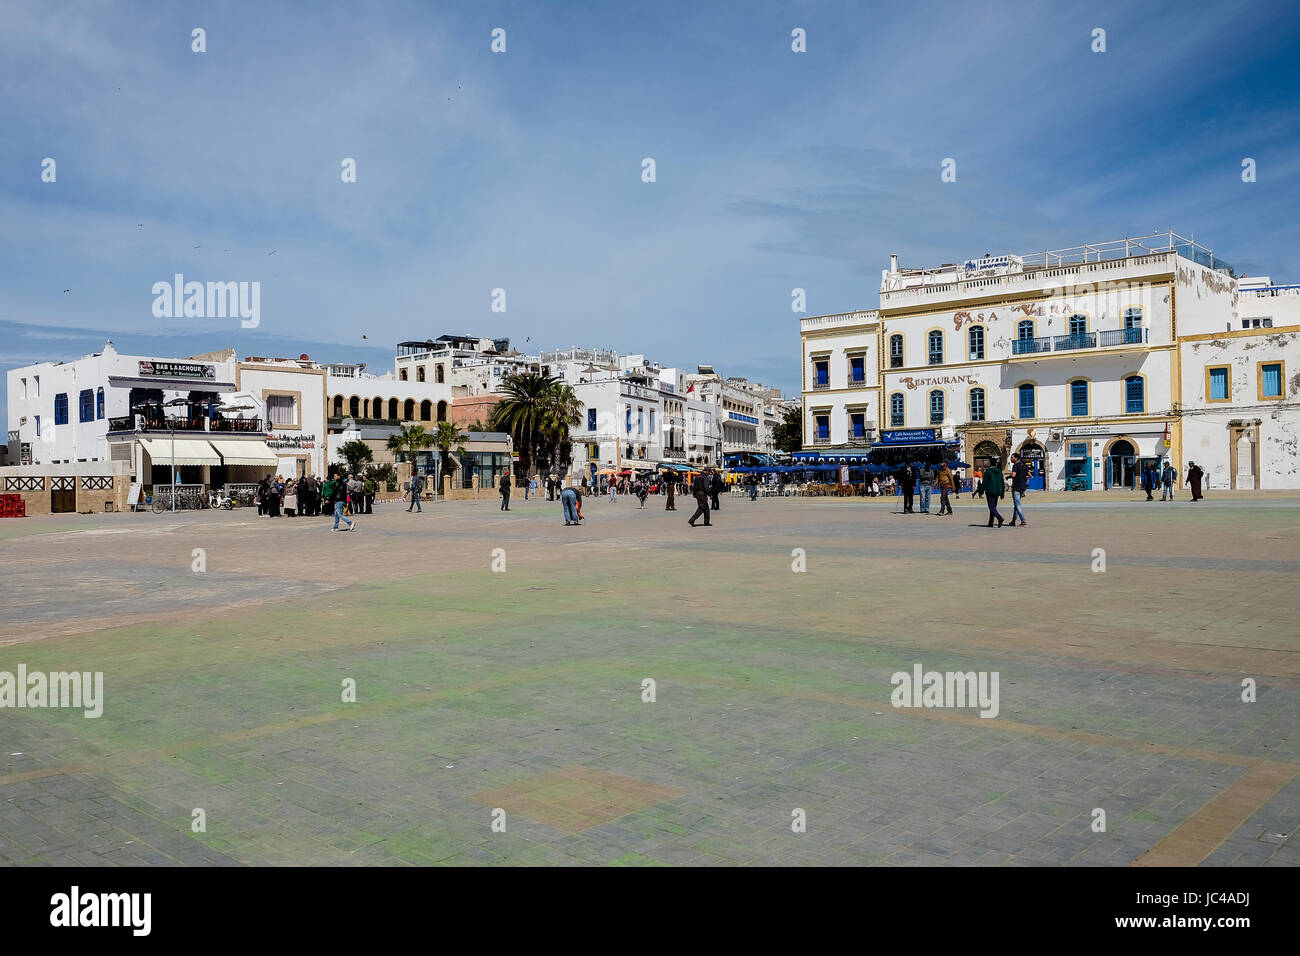 Place Moulay Hassan square in Morocco's Essaouira Stock Photo